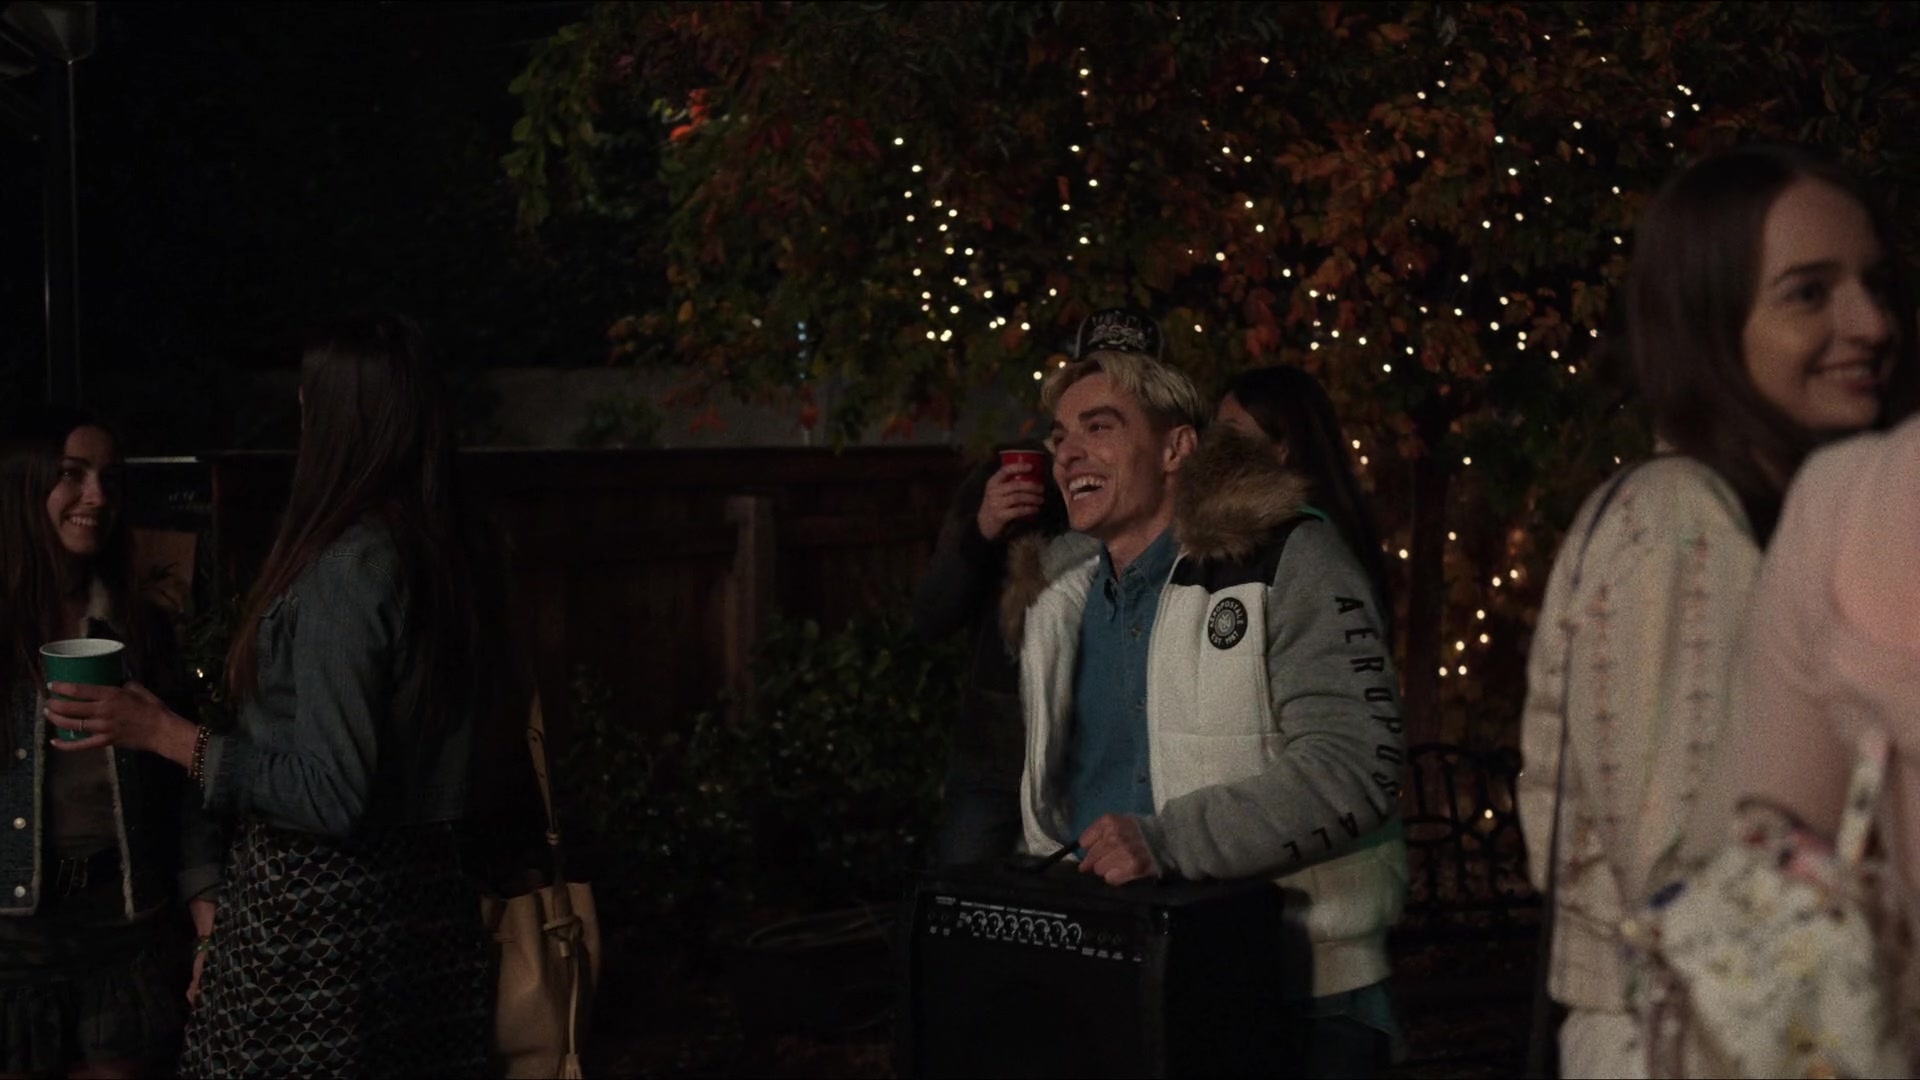 Aeropostale Jacket Of Dave Franco As Xavier In The Afterparty S01E05 ...